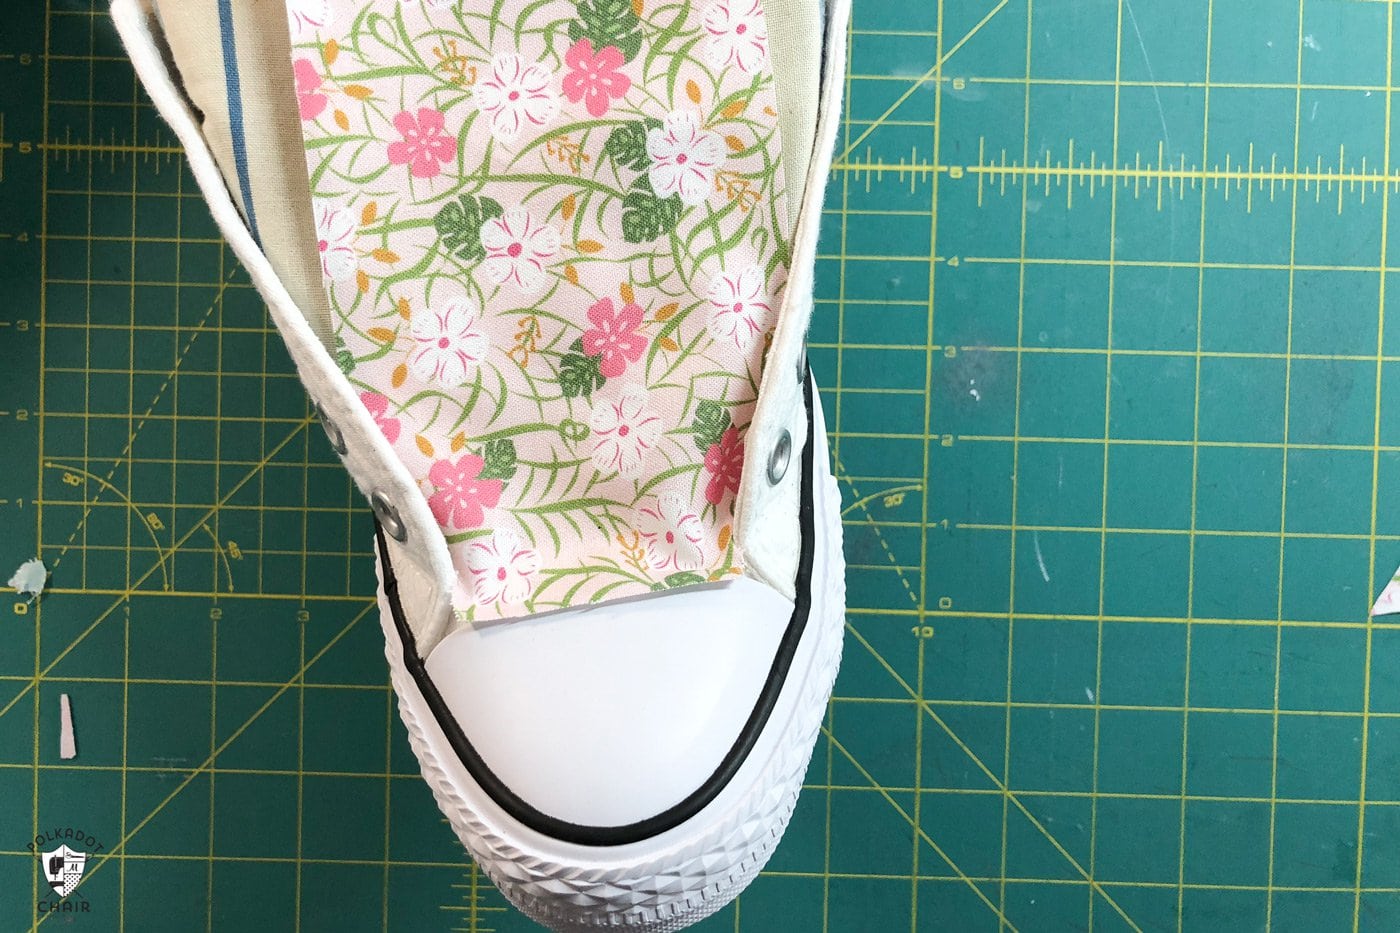 test fit the fabric onto shoes